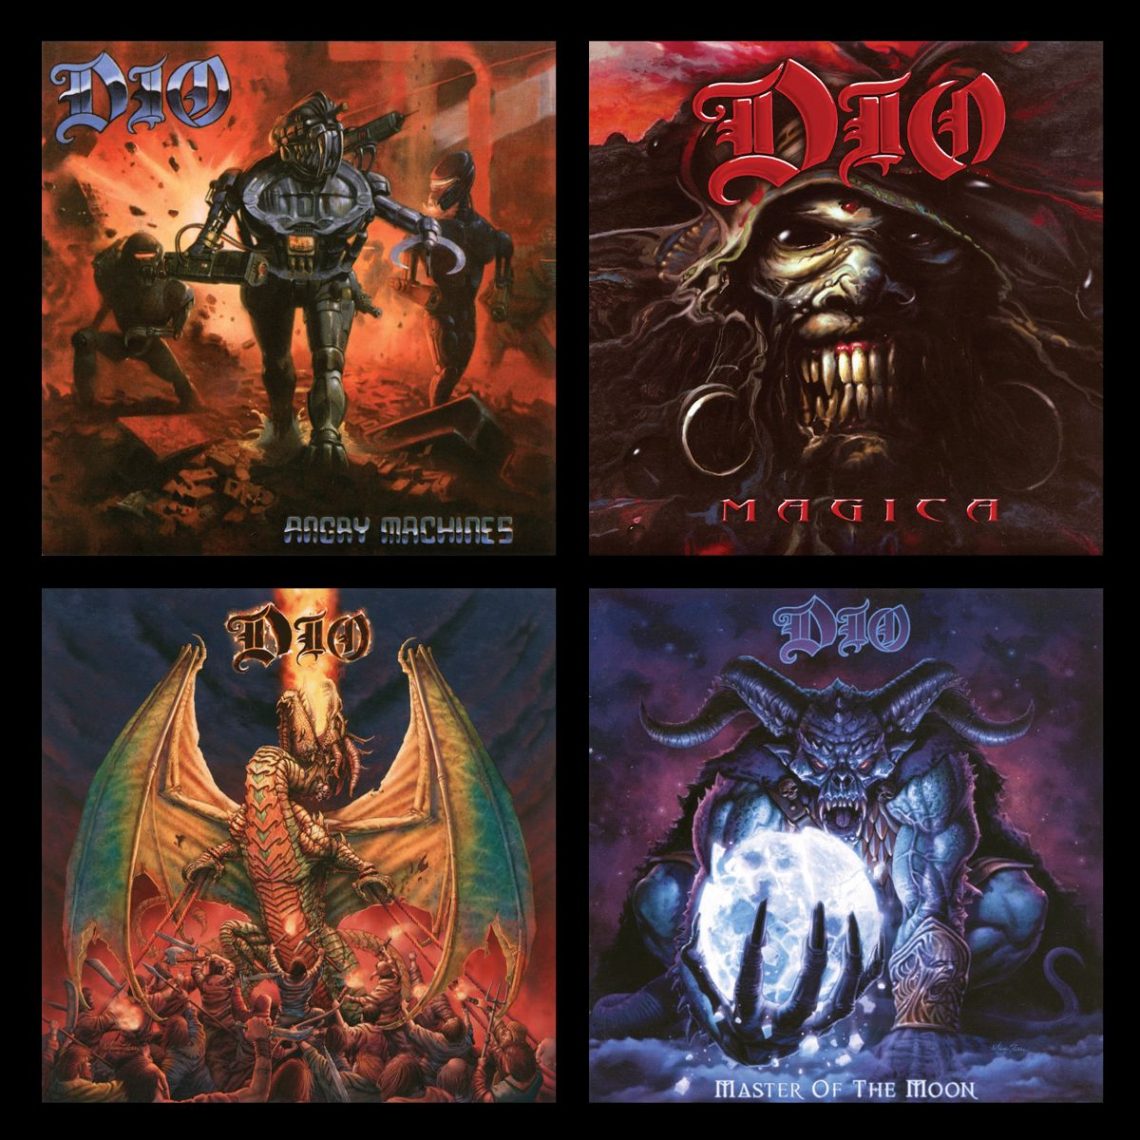 DIO shares more rare live tracks ahead of reissues release